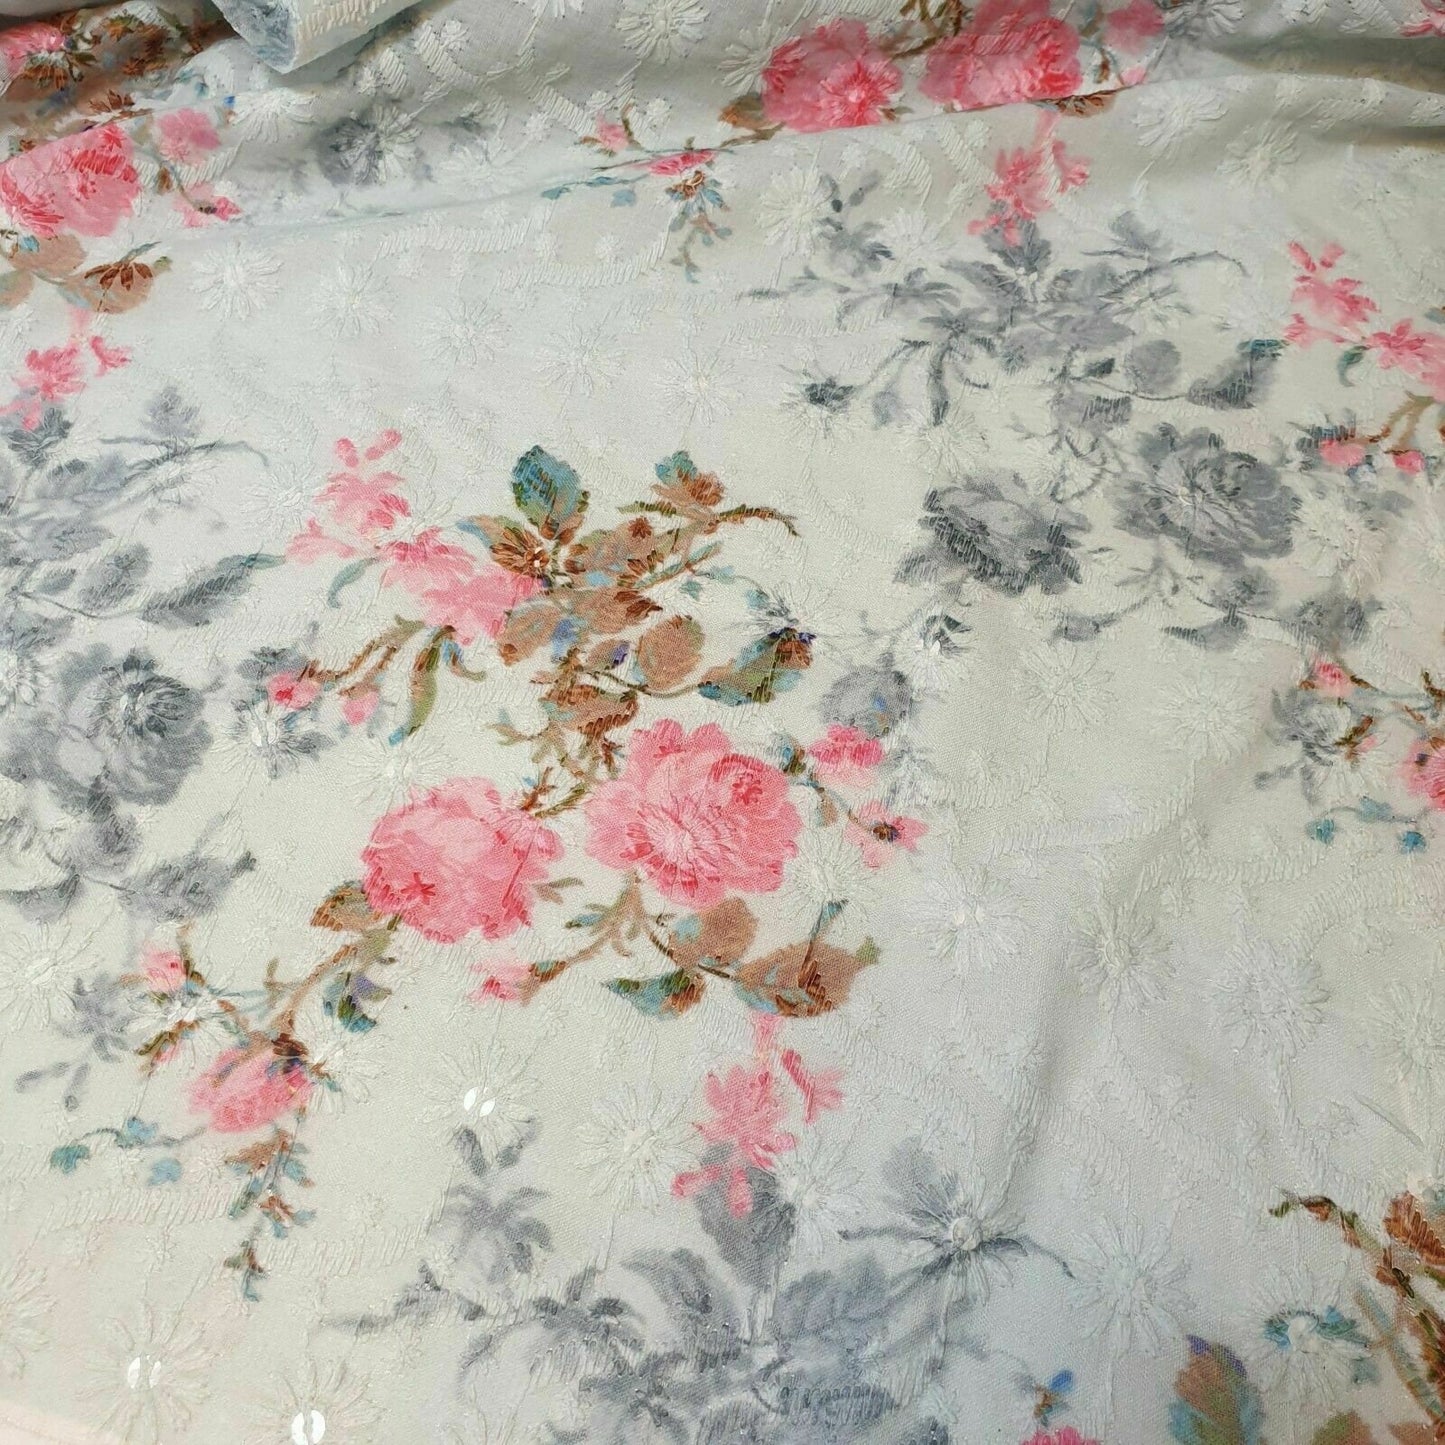 100% Cotton Broderie Anglaise Floral Embroidery Border Dress Fabric 44"